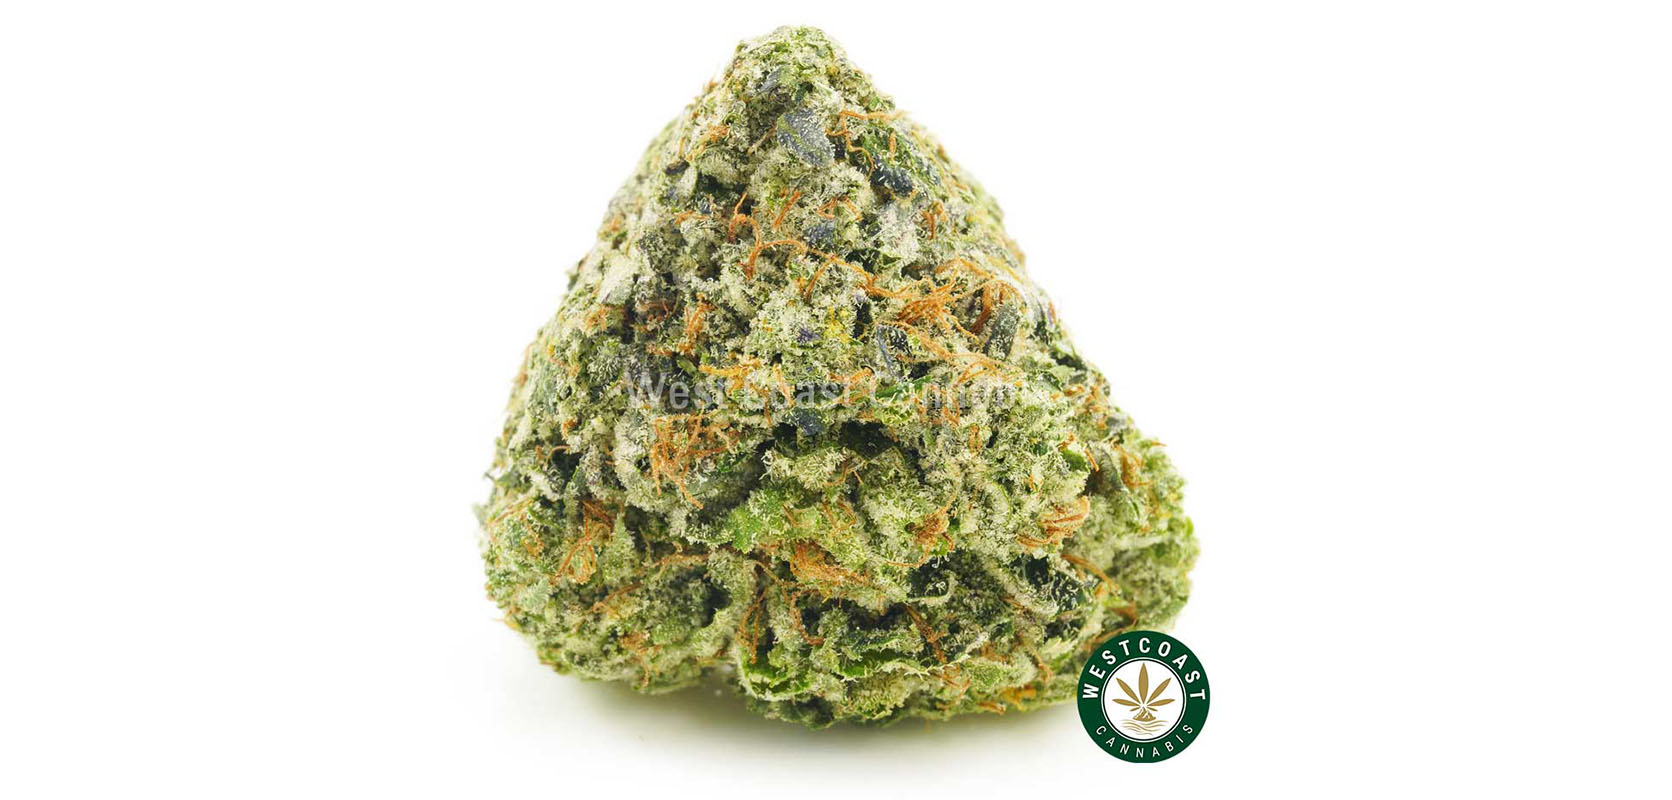 Buy blueberry rockstar weed strain online at the canadian online dispensary mail order marijuana.